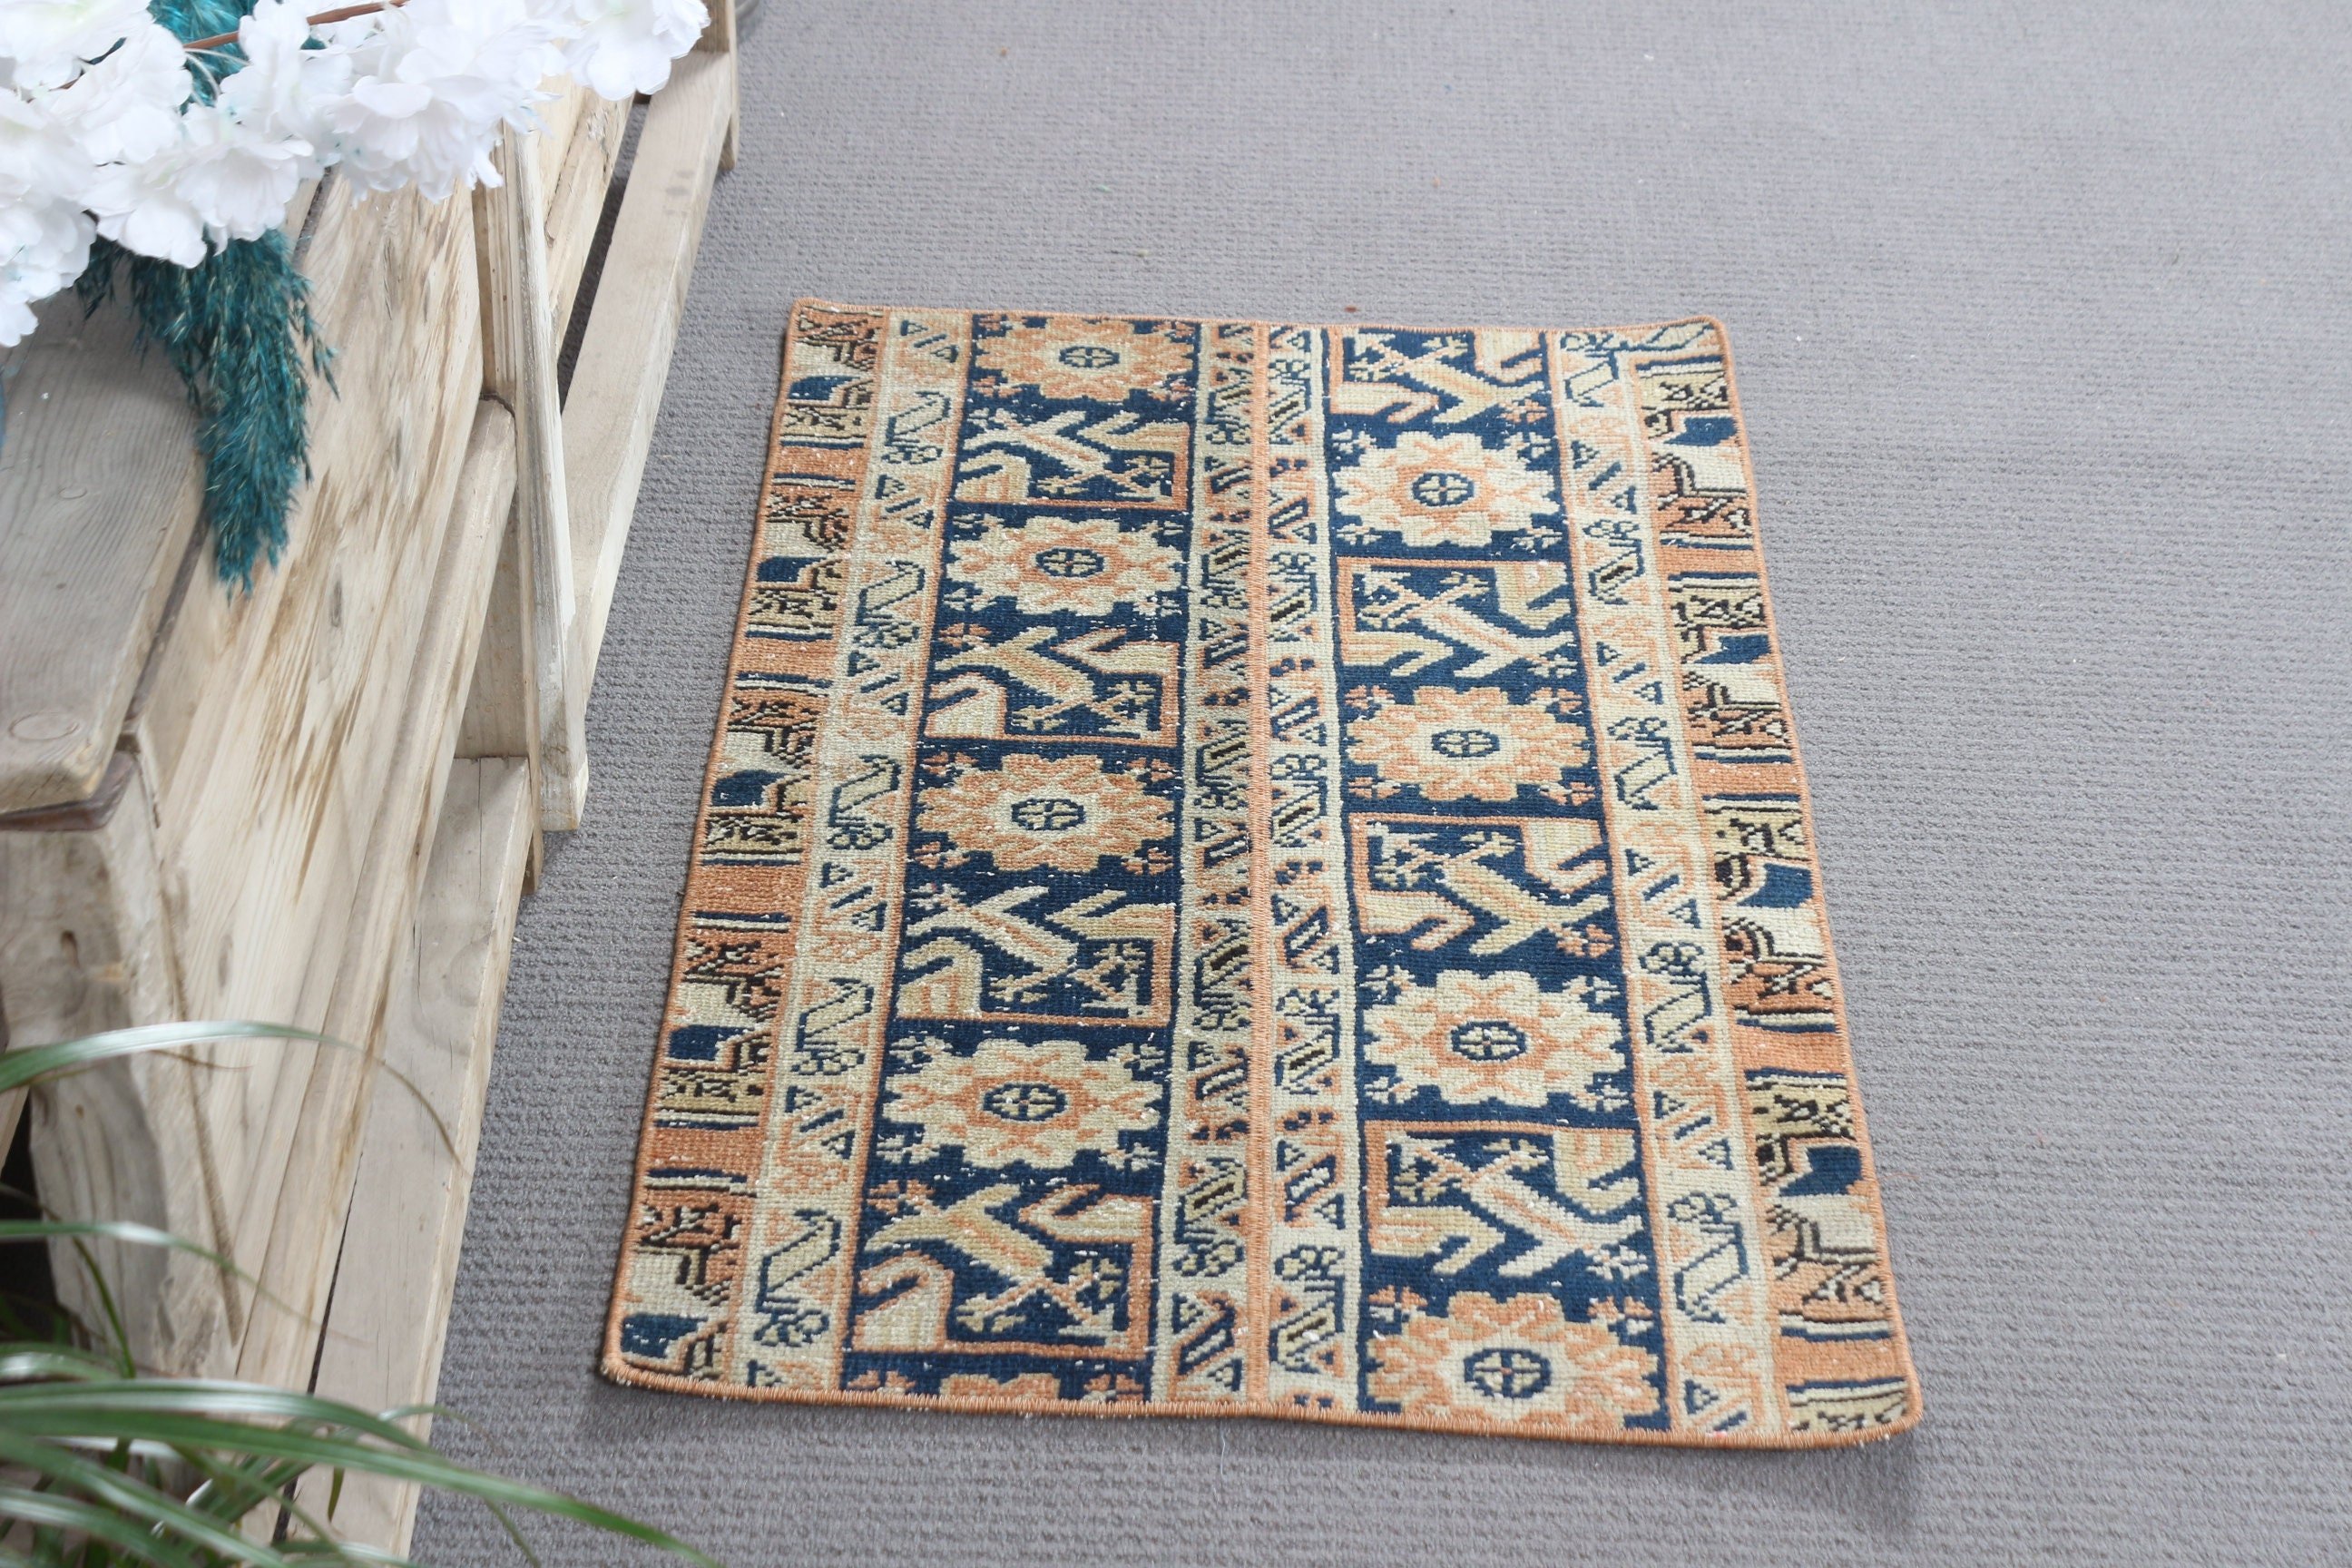 Turkish Rug, Bedroom Rug, Rugs for Kitchen, 2x3.2 ft Small Rug, Moroccan Rugs, Kitchen Rugs, Brown Oushak Rug, Entry Rug, Vintage Rug